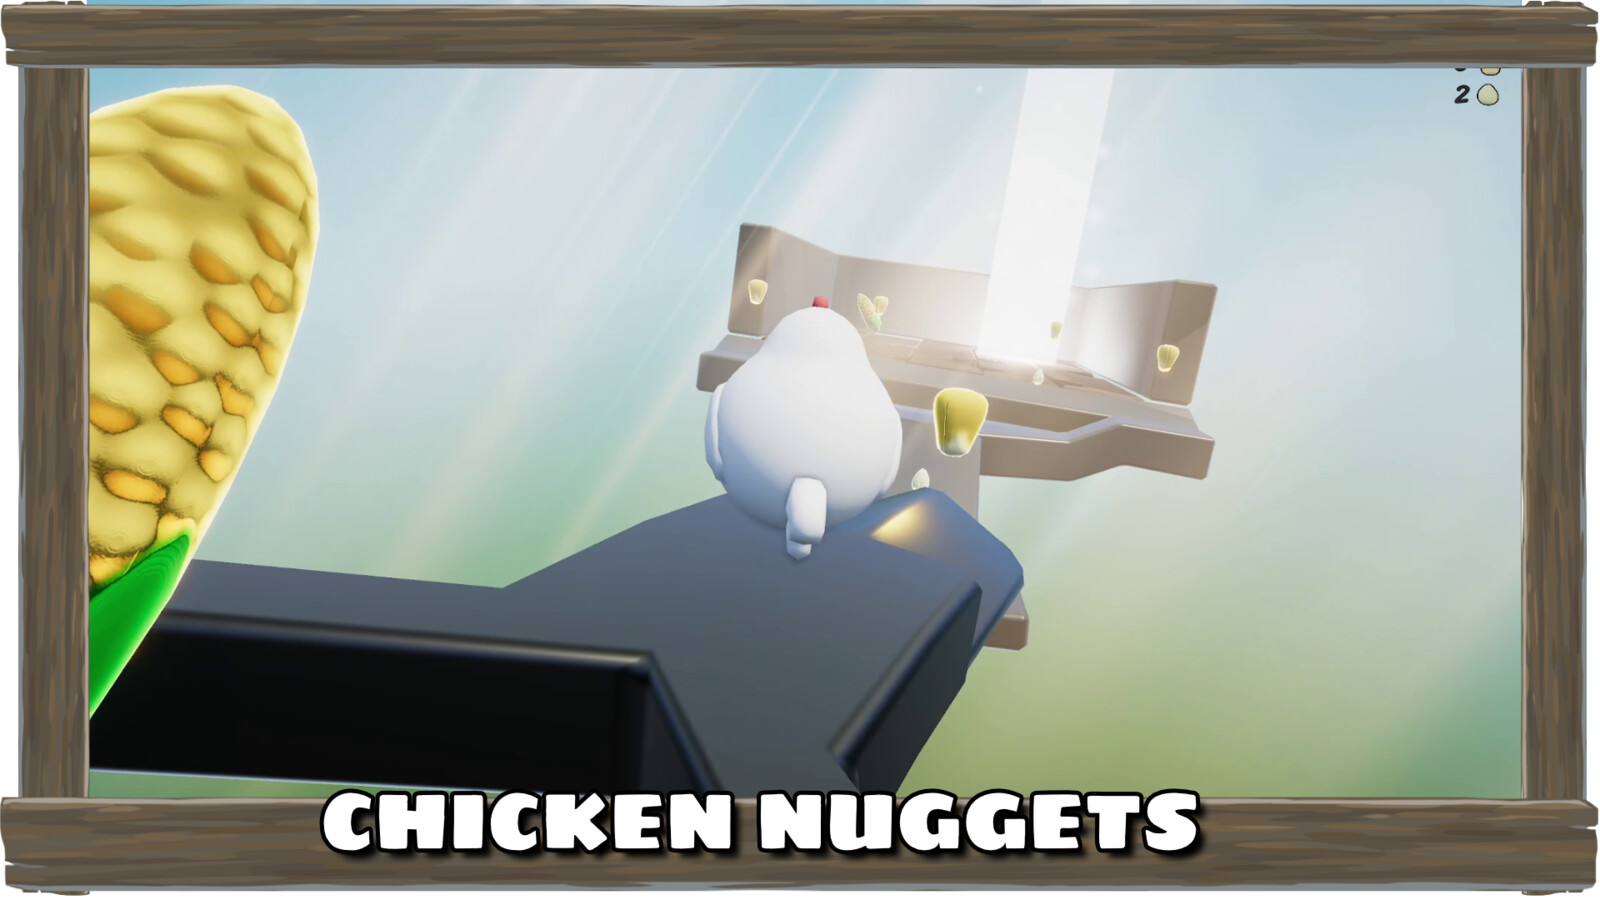 Taking a leap of faith in Chicken Nuggets